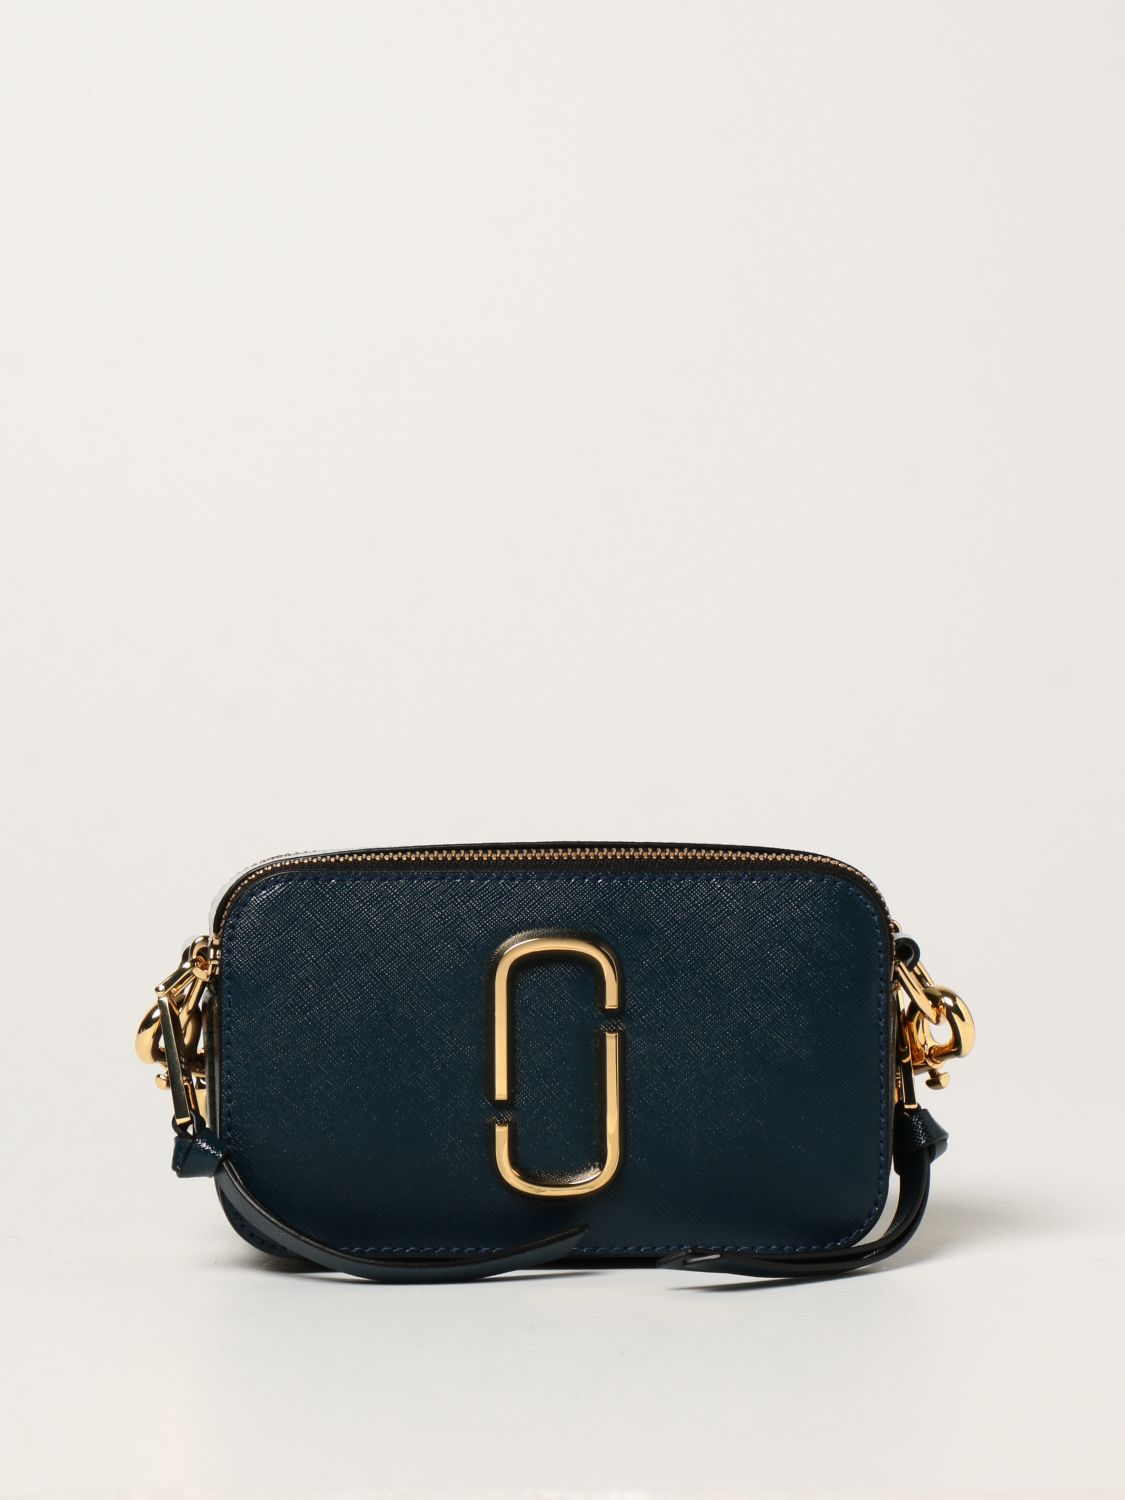 MARC JACOBS: The Snapshot Cane bag in grained leather - Blue | Marc ...